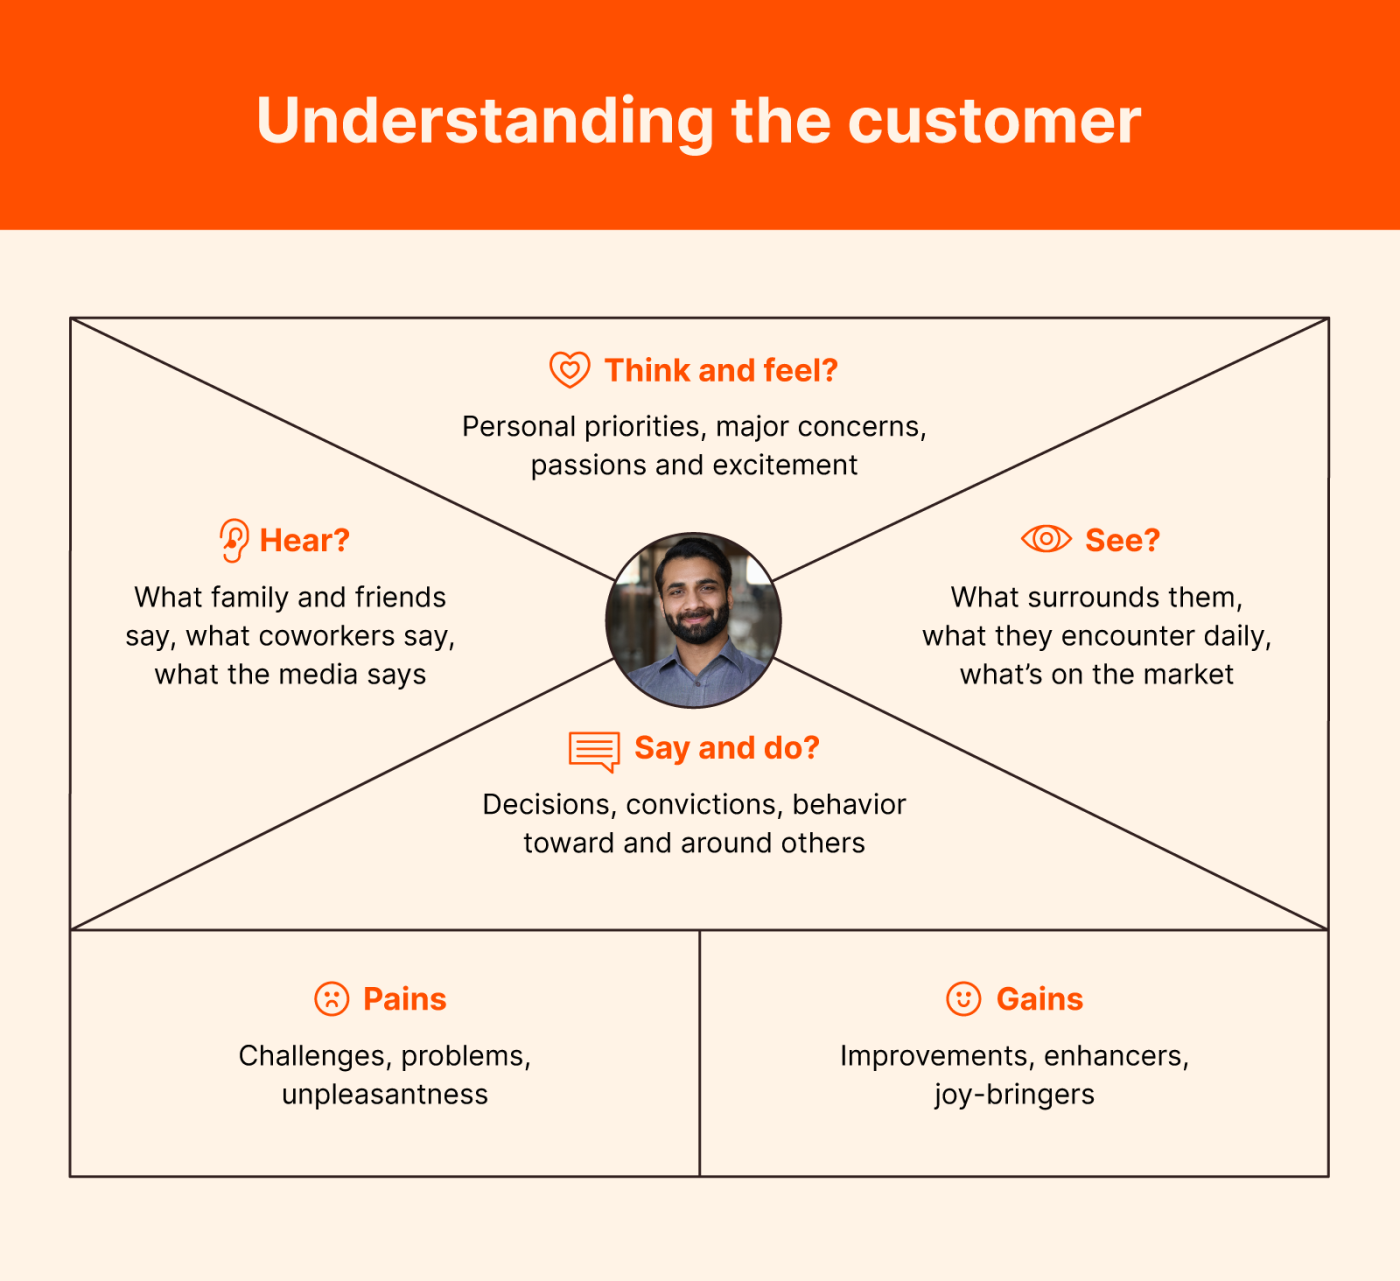 A graphic map for better understanding the customer and their pains and gains. A top box has four sections for what the customer thinks and feels, hears, sees, and says and does. The bottom box is used to list pains and gains based on these insights.